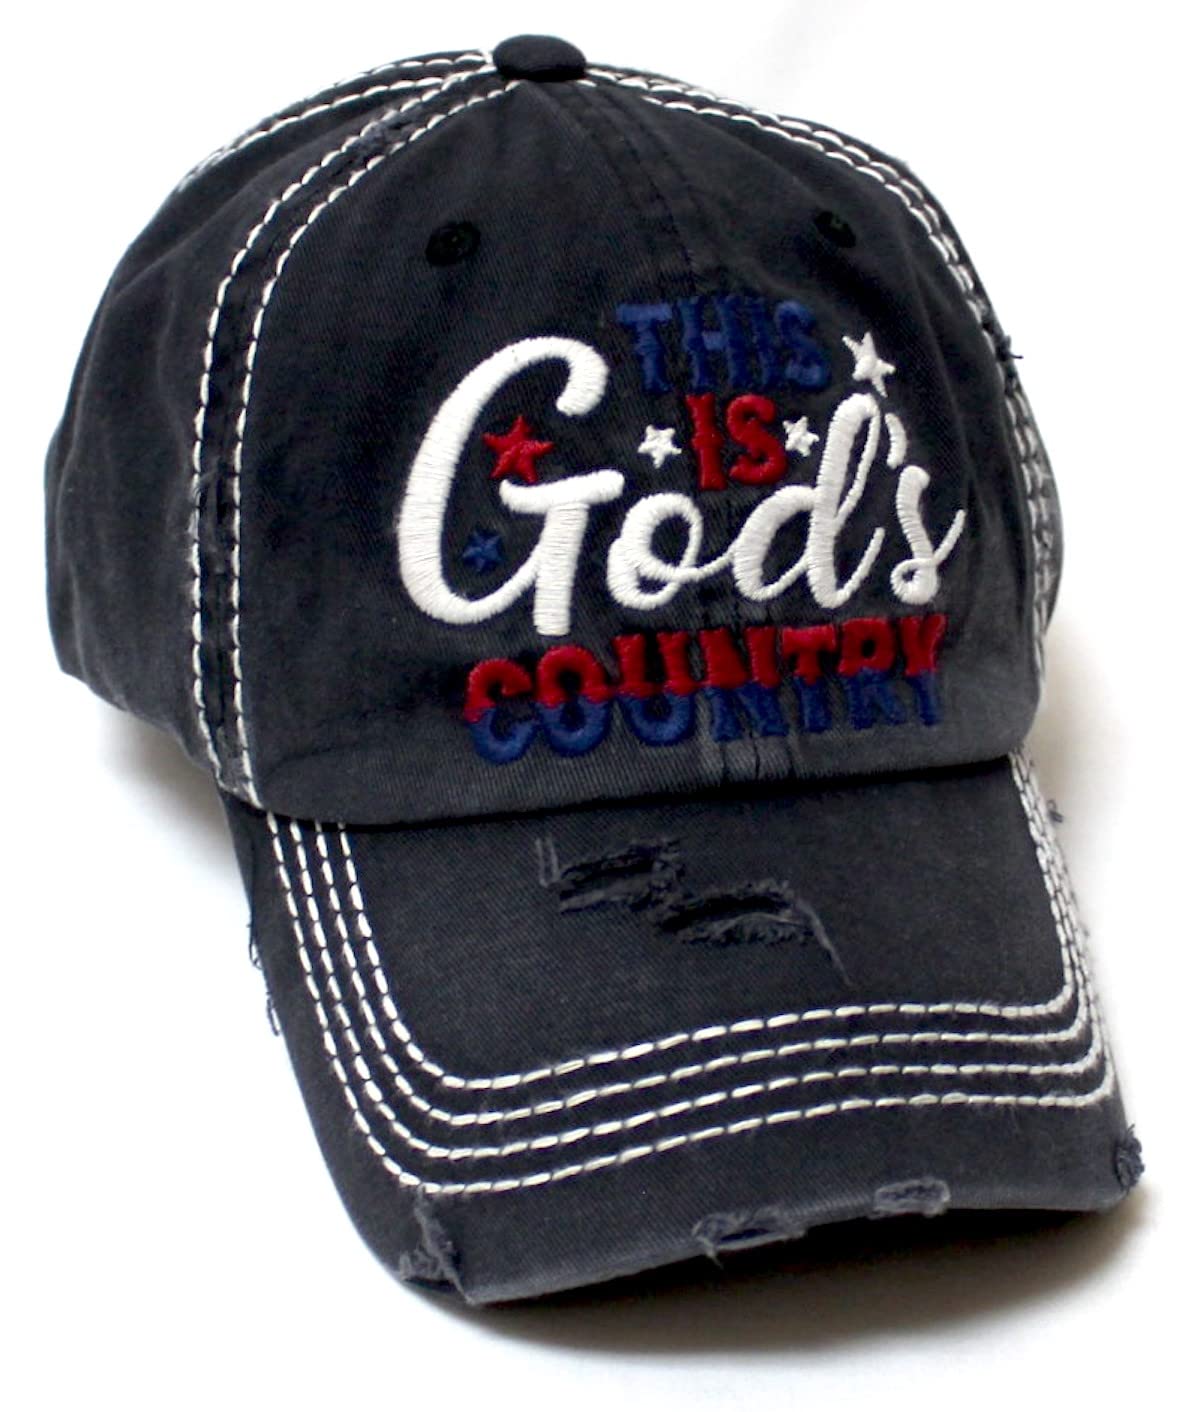 CAPS 'N VINTAGE American Distressed Hat This is God's Country Stars, Stripes & Red, White & Blue USA Themed Cap, Black